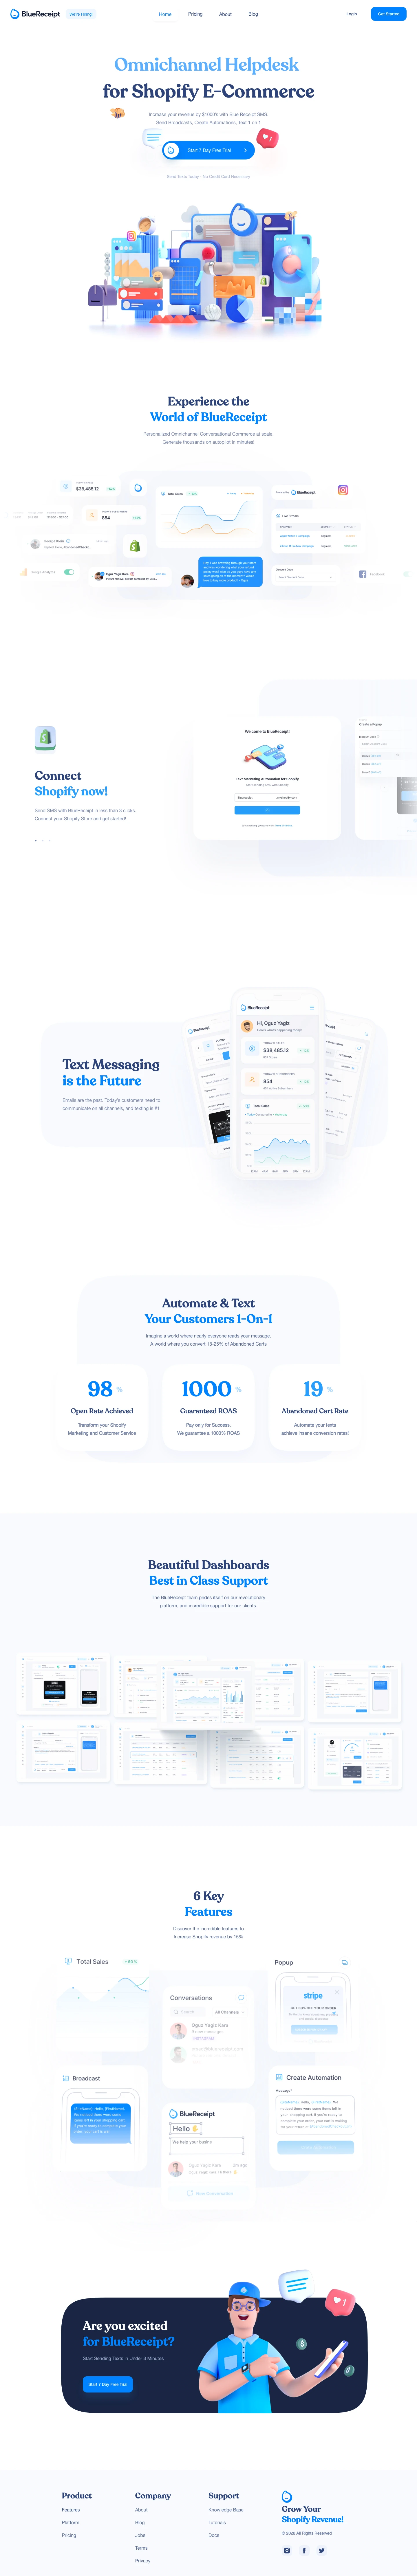 BlueReceipt Landing Page Example: Text Message Marketing for Shopify.